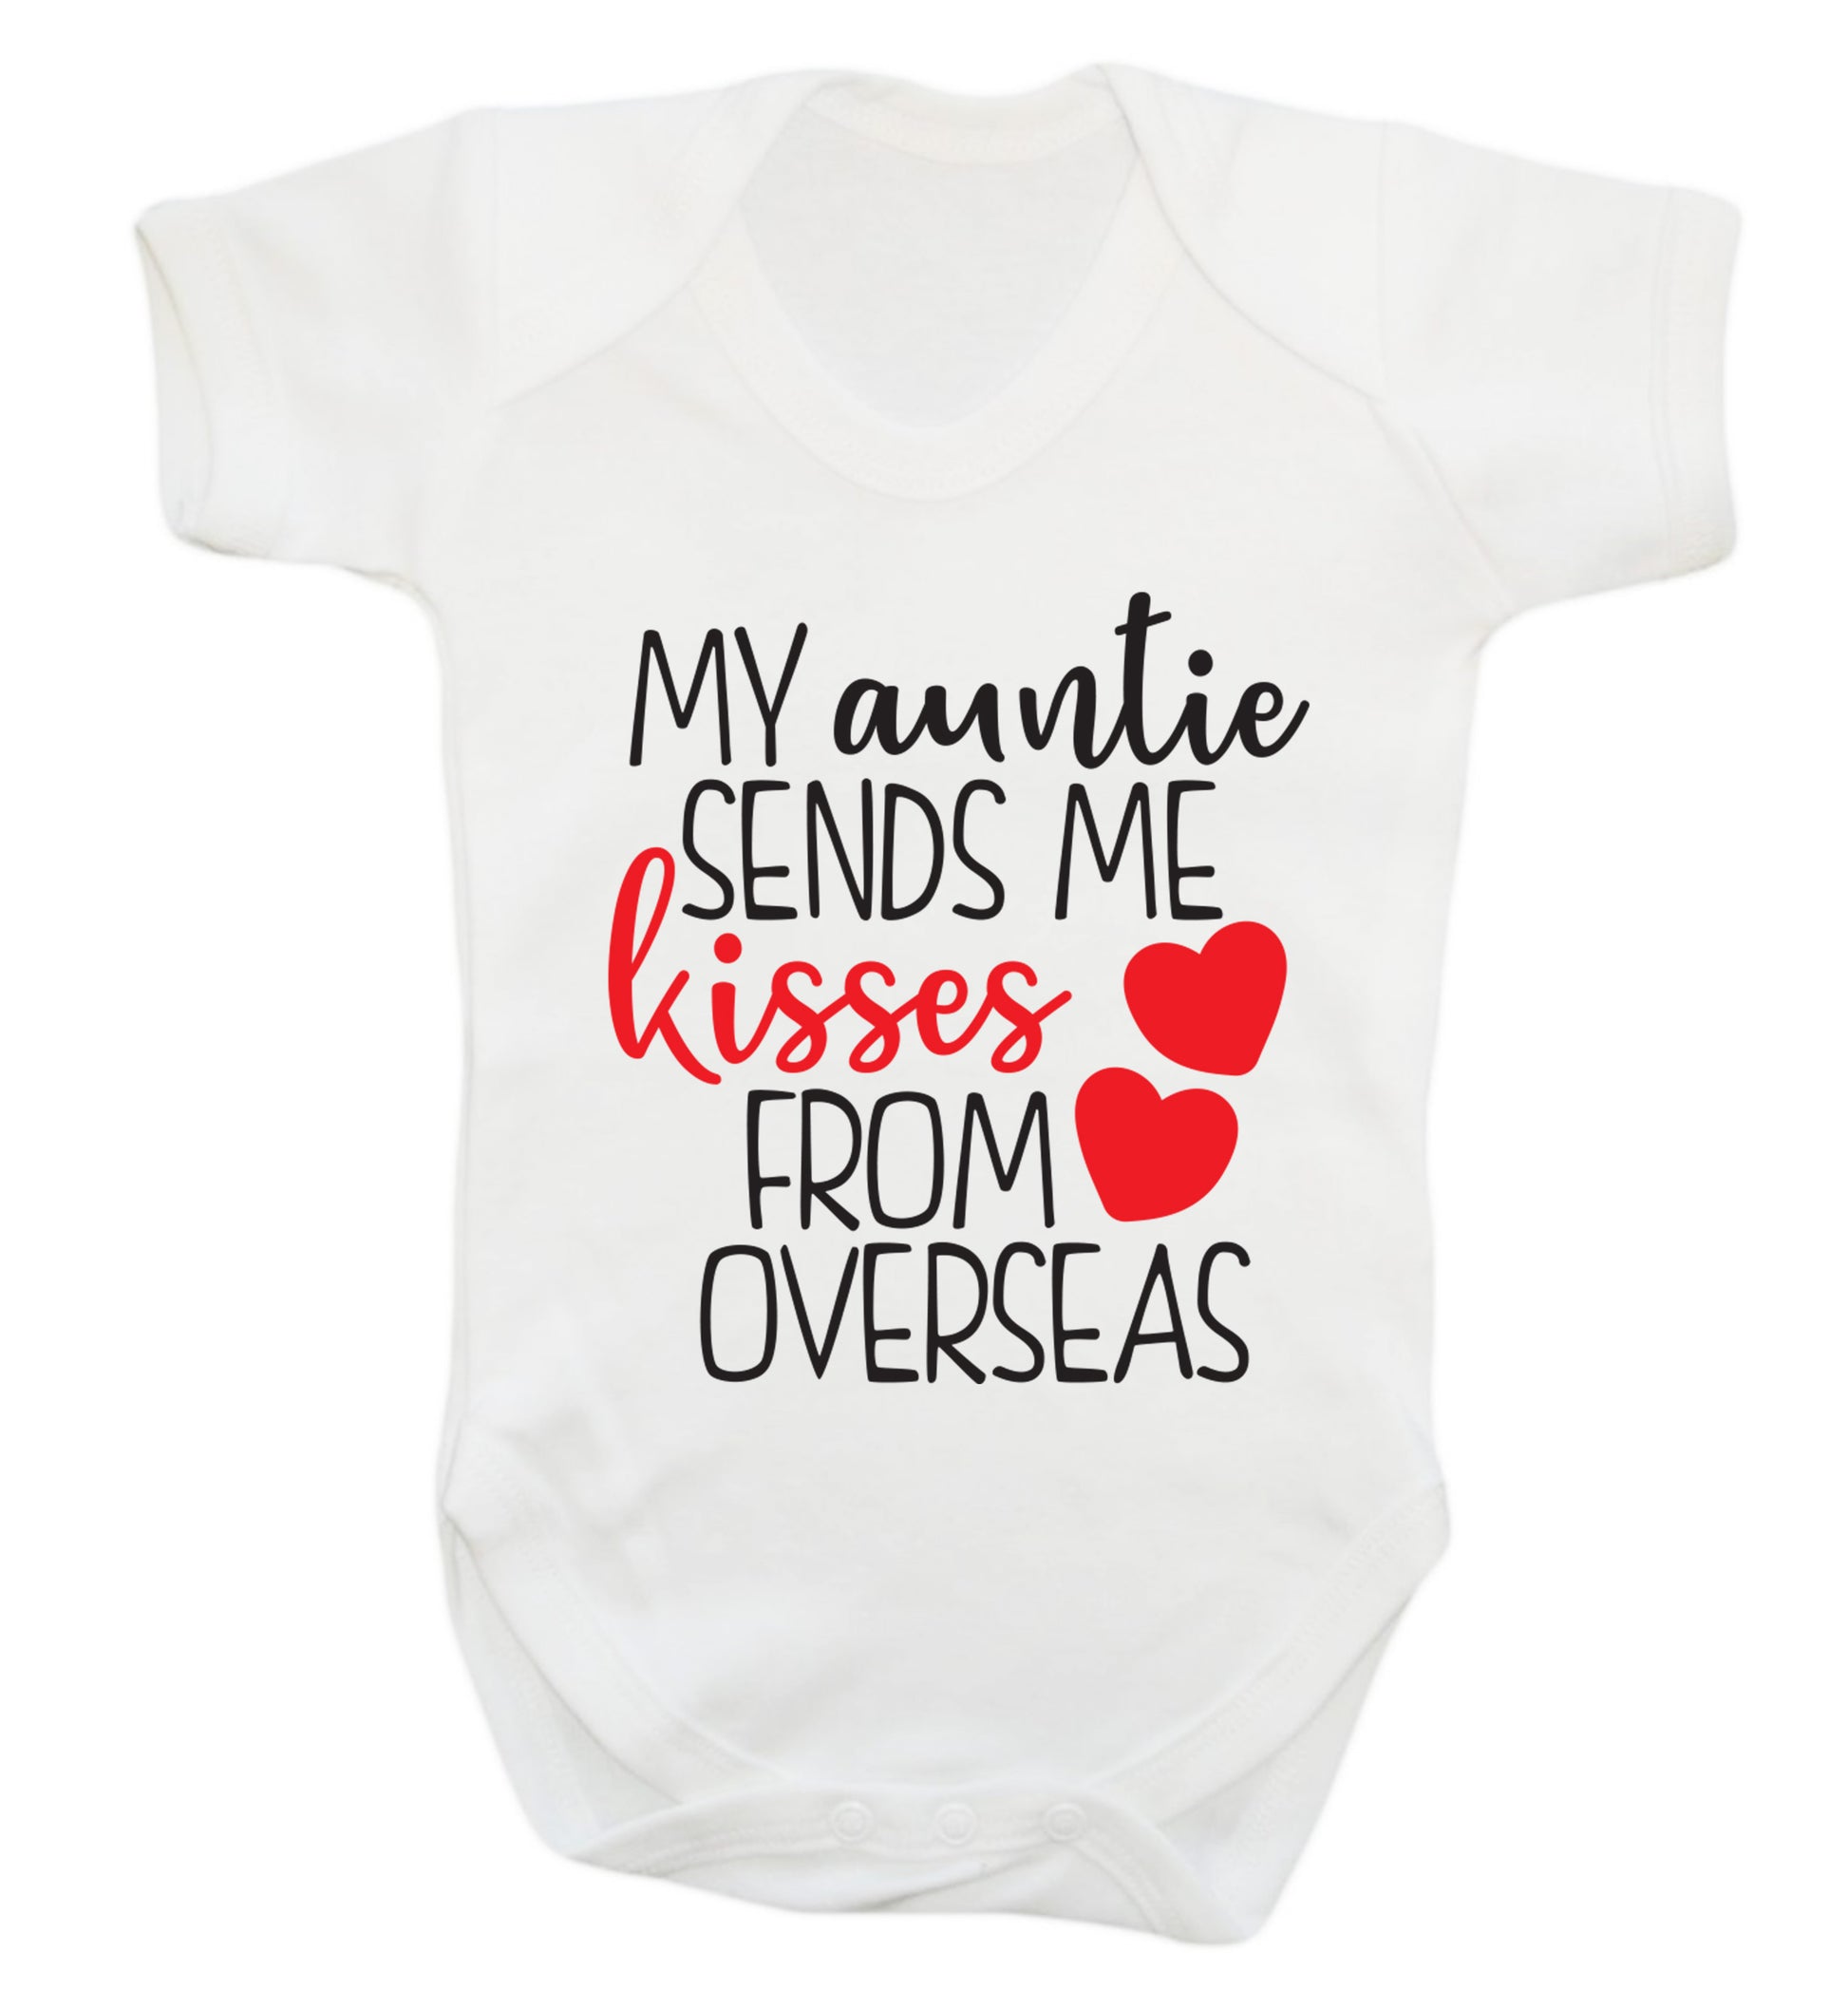 My auntie sends me kisses from overseas Baby Vest white 18-24 months